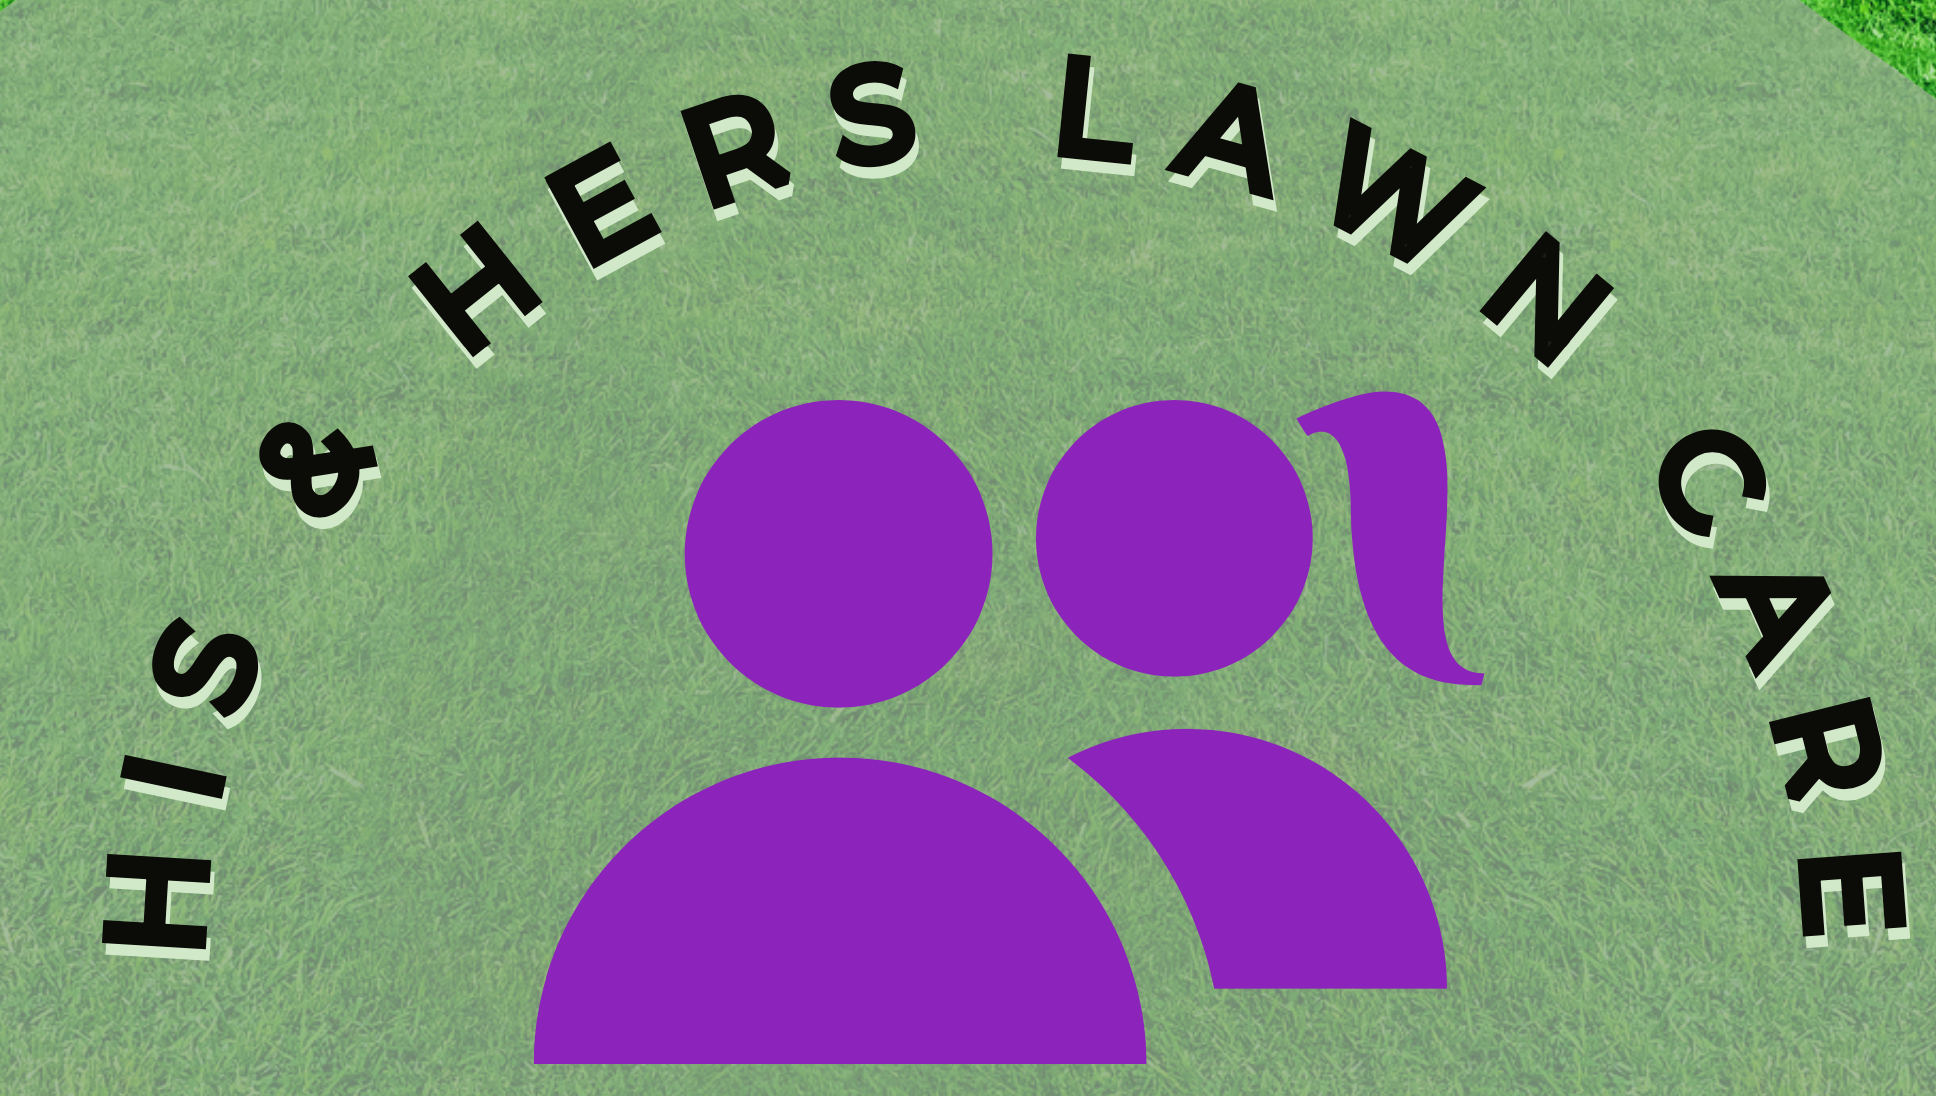 His & Her's Lawn Care Logo